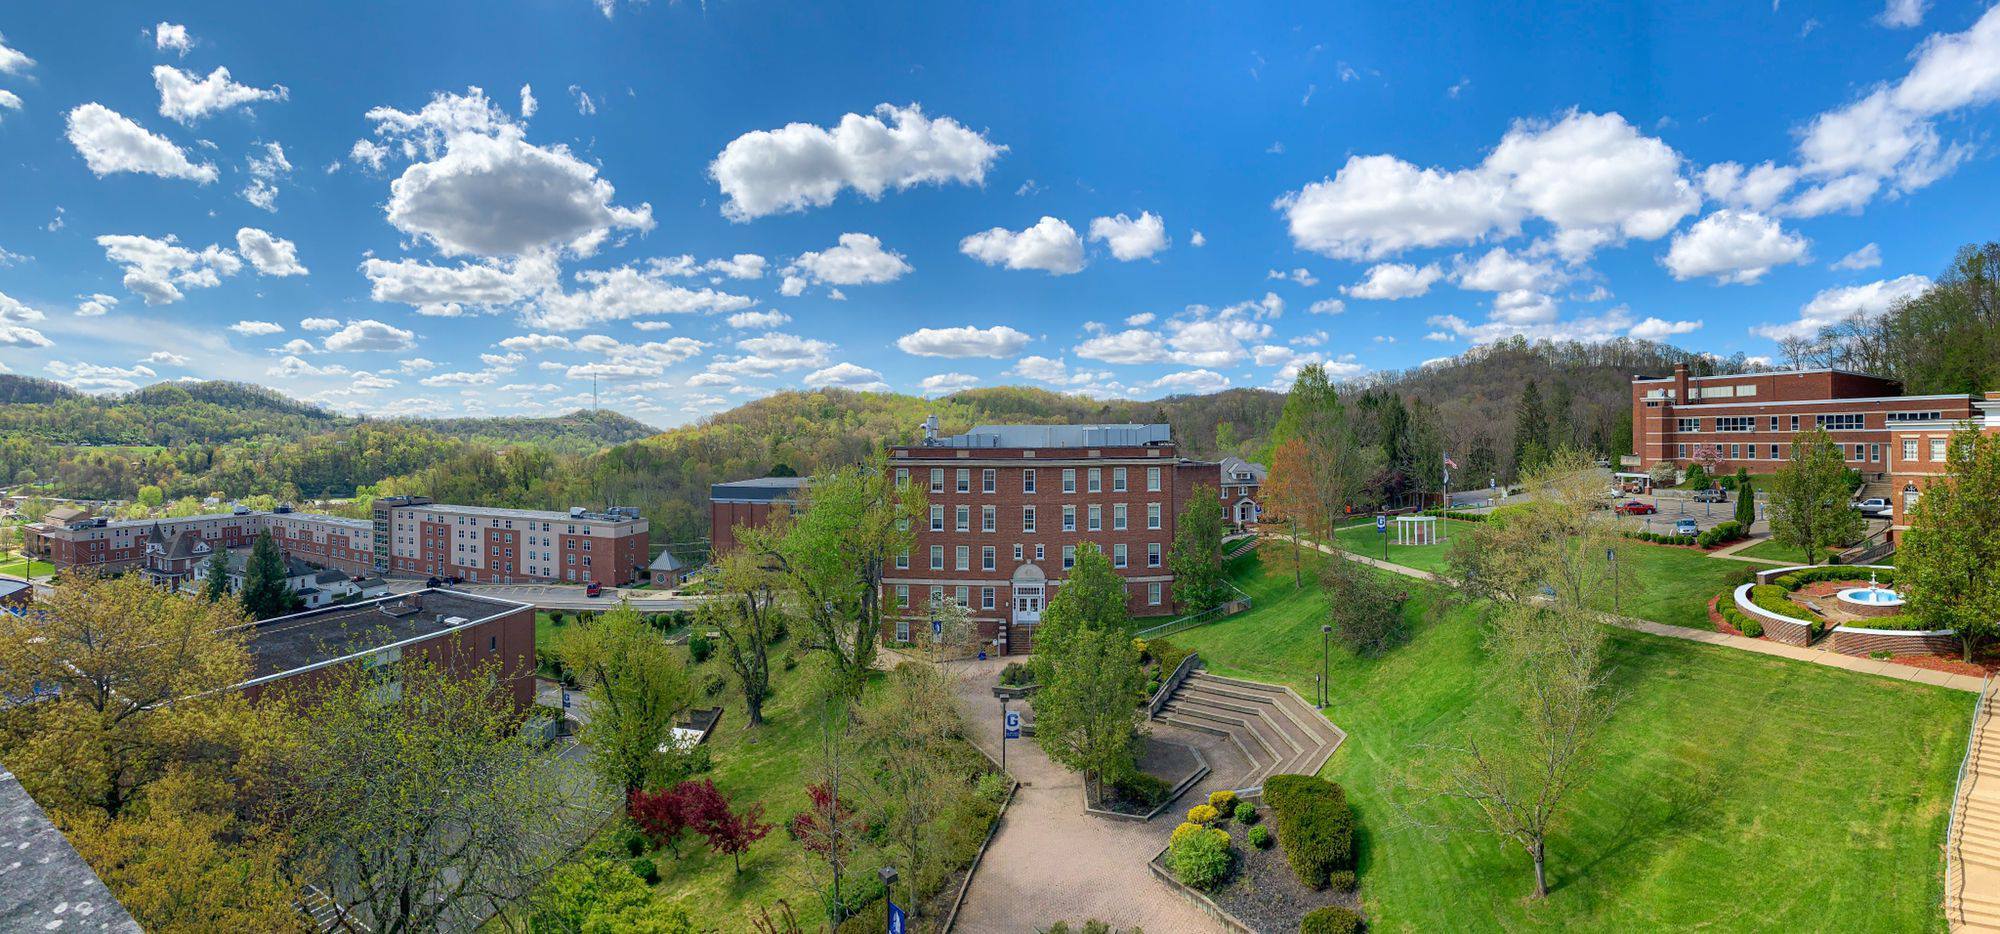 A wide arial shot of campus, which is tucked amongst the West Virginia hills. It's a sunny day with a brilliant blue sky and bright fluffy clouds. Trees are just beginning to show new leaves and the grass is an almost-neon green from new growth. In the center of the picture stands Science Hall and the amphitheater.